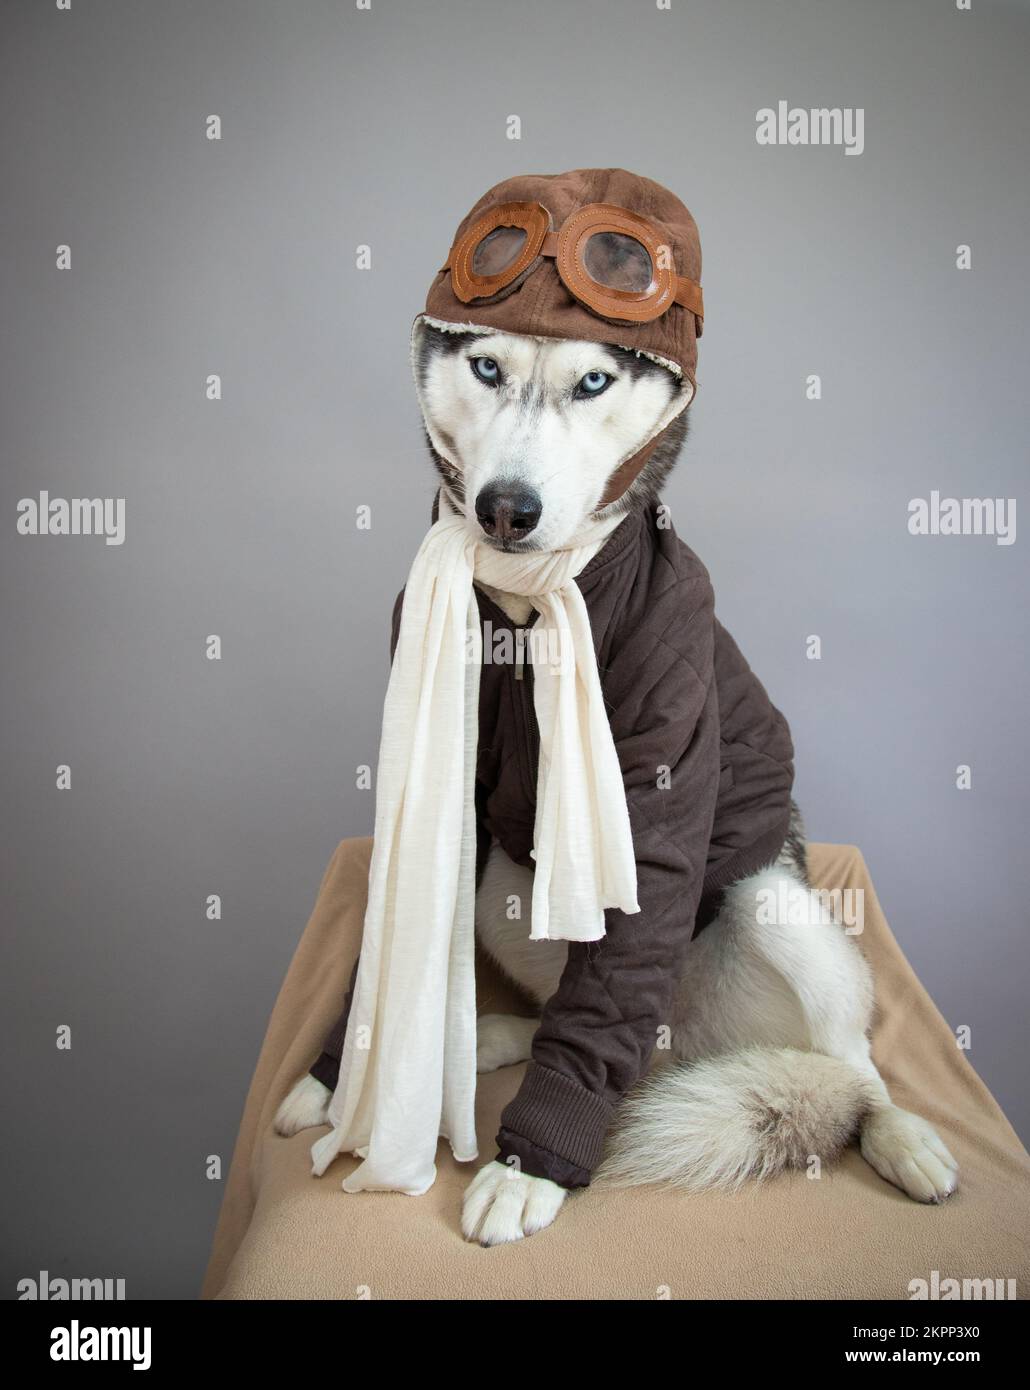 Portrait of a siberian husky sitting on a chair dressed as a pilot Stock Photo